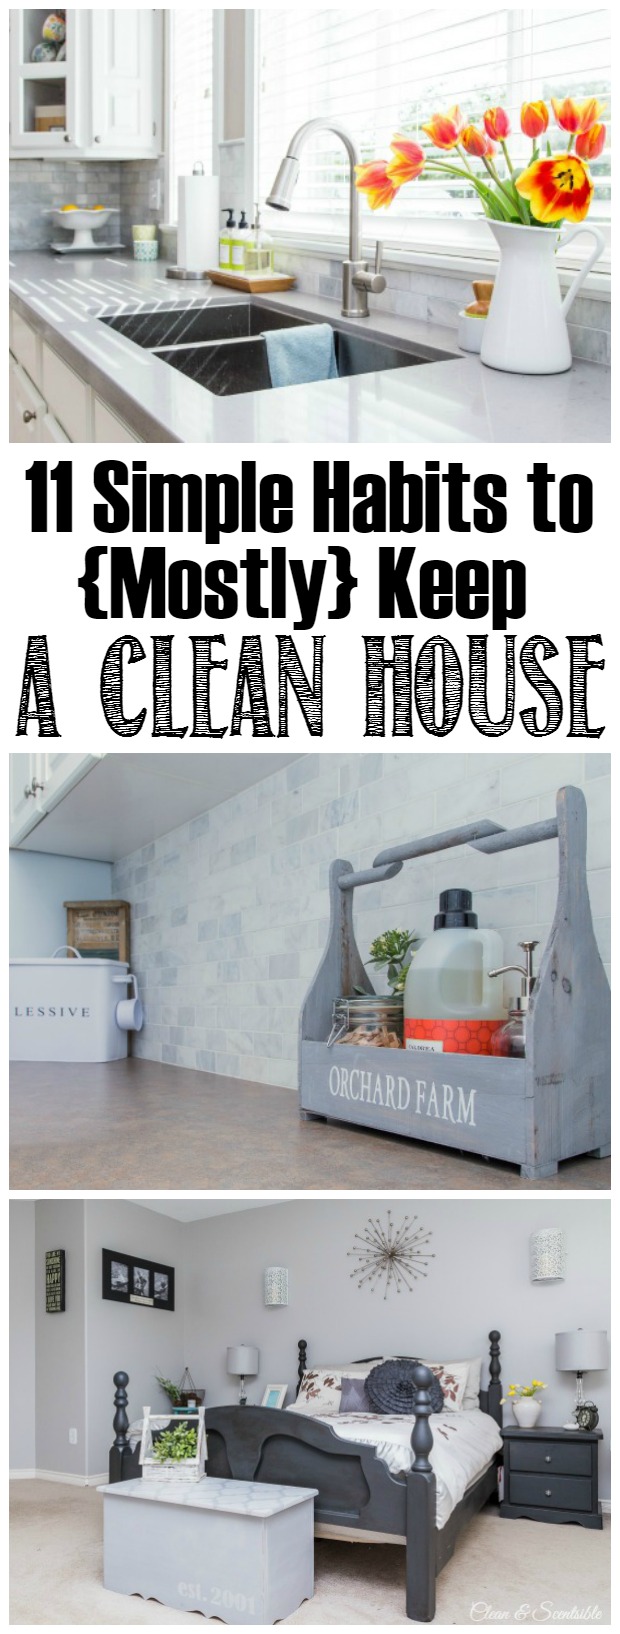 https://www.cleanandscentsible.com/wp-content/uploads/2016/05/How-to-keep-a-clean-house.jpg